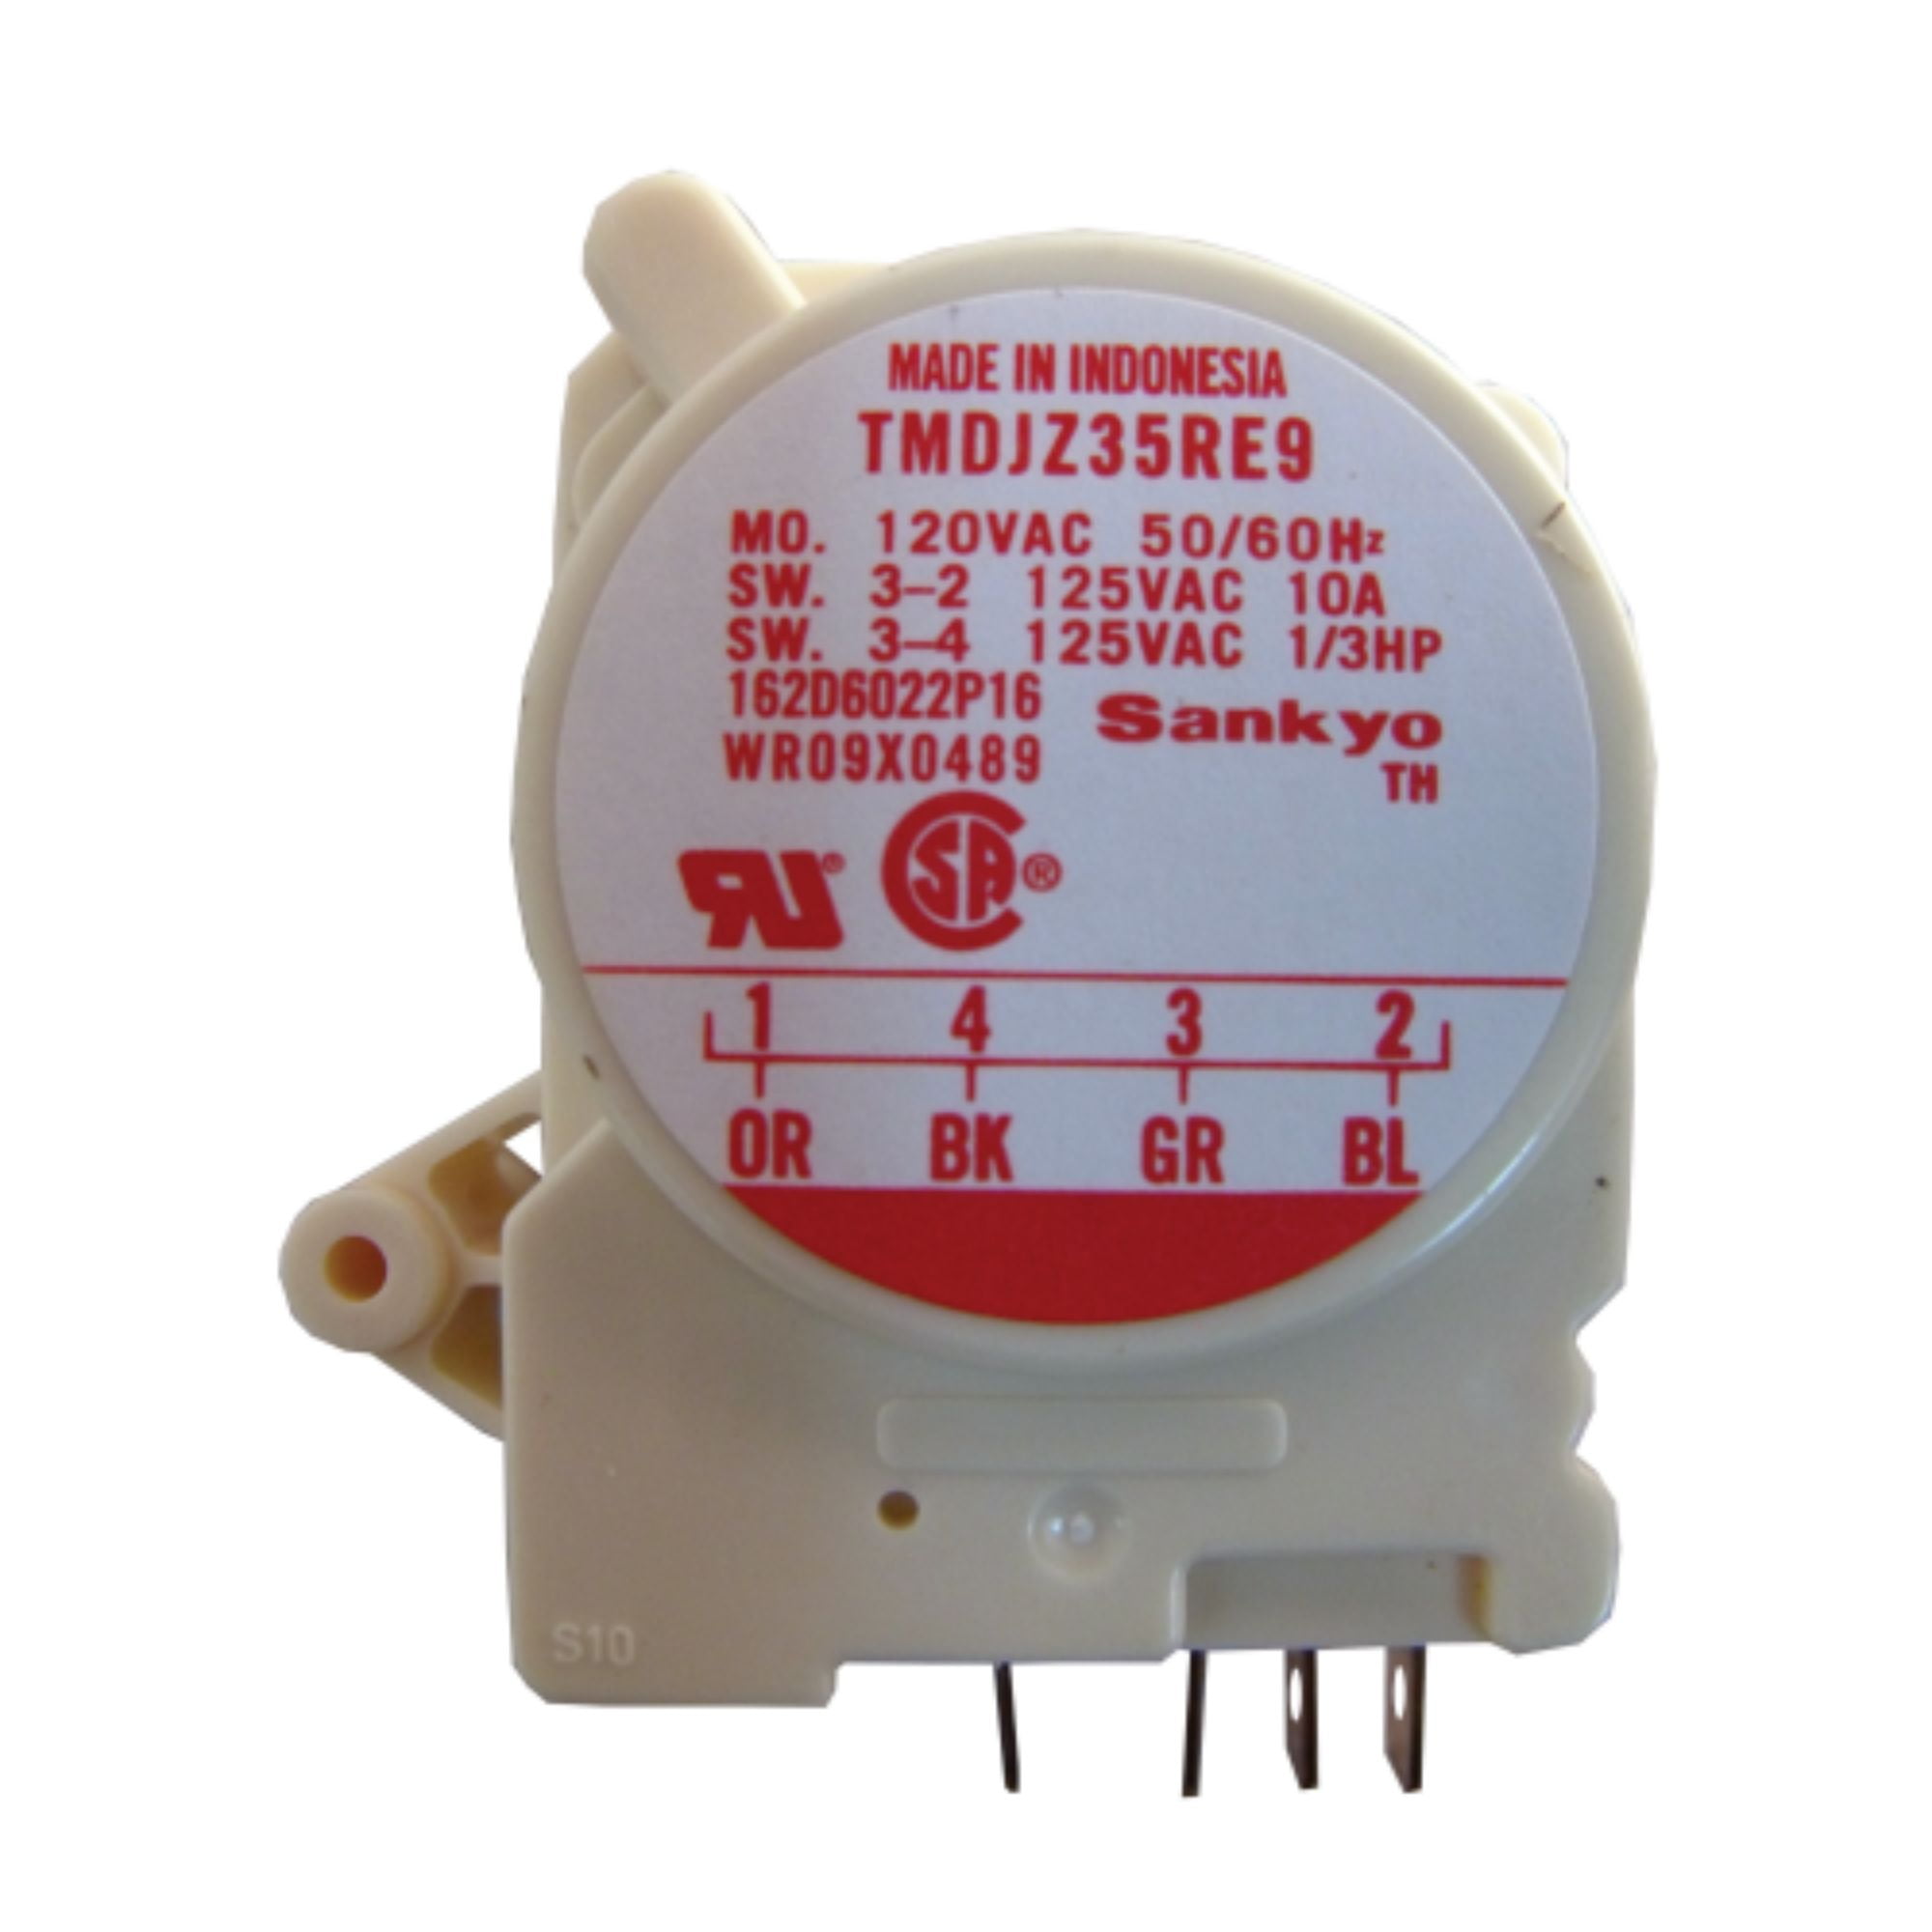 Details about   WR9X520 Refrigerator Defrost Timer GE WR9X481 AP2061721 PS310930 311013 AH310930 